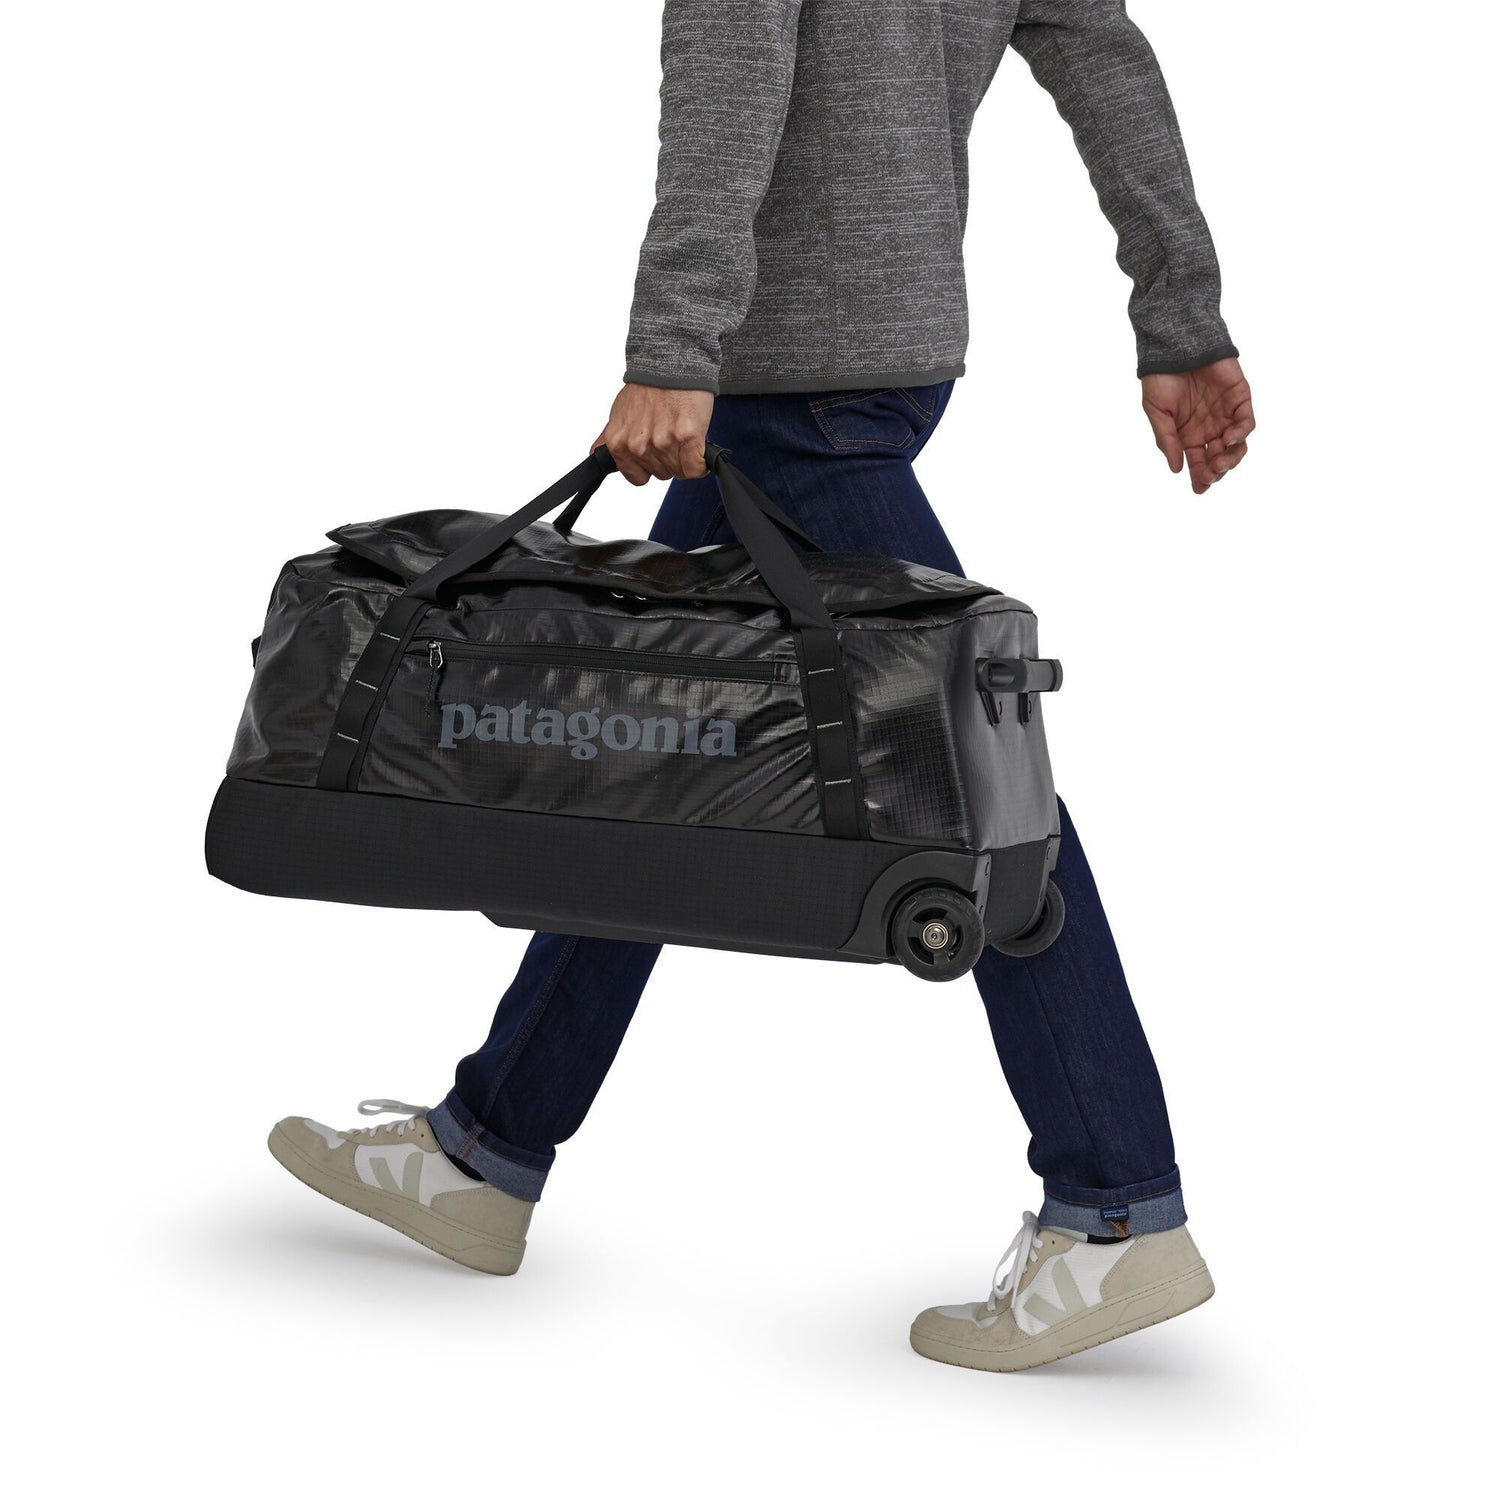 Patagonia Black Hole Wheeled Duffel Bag 70L - Recycled Polyester Classic Navy Bags